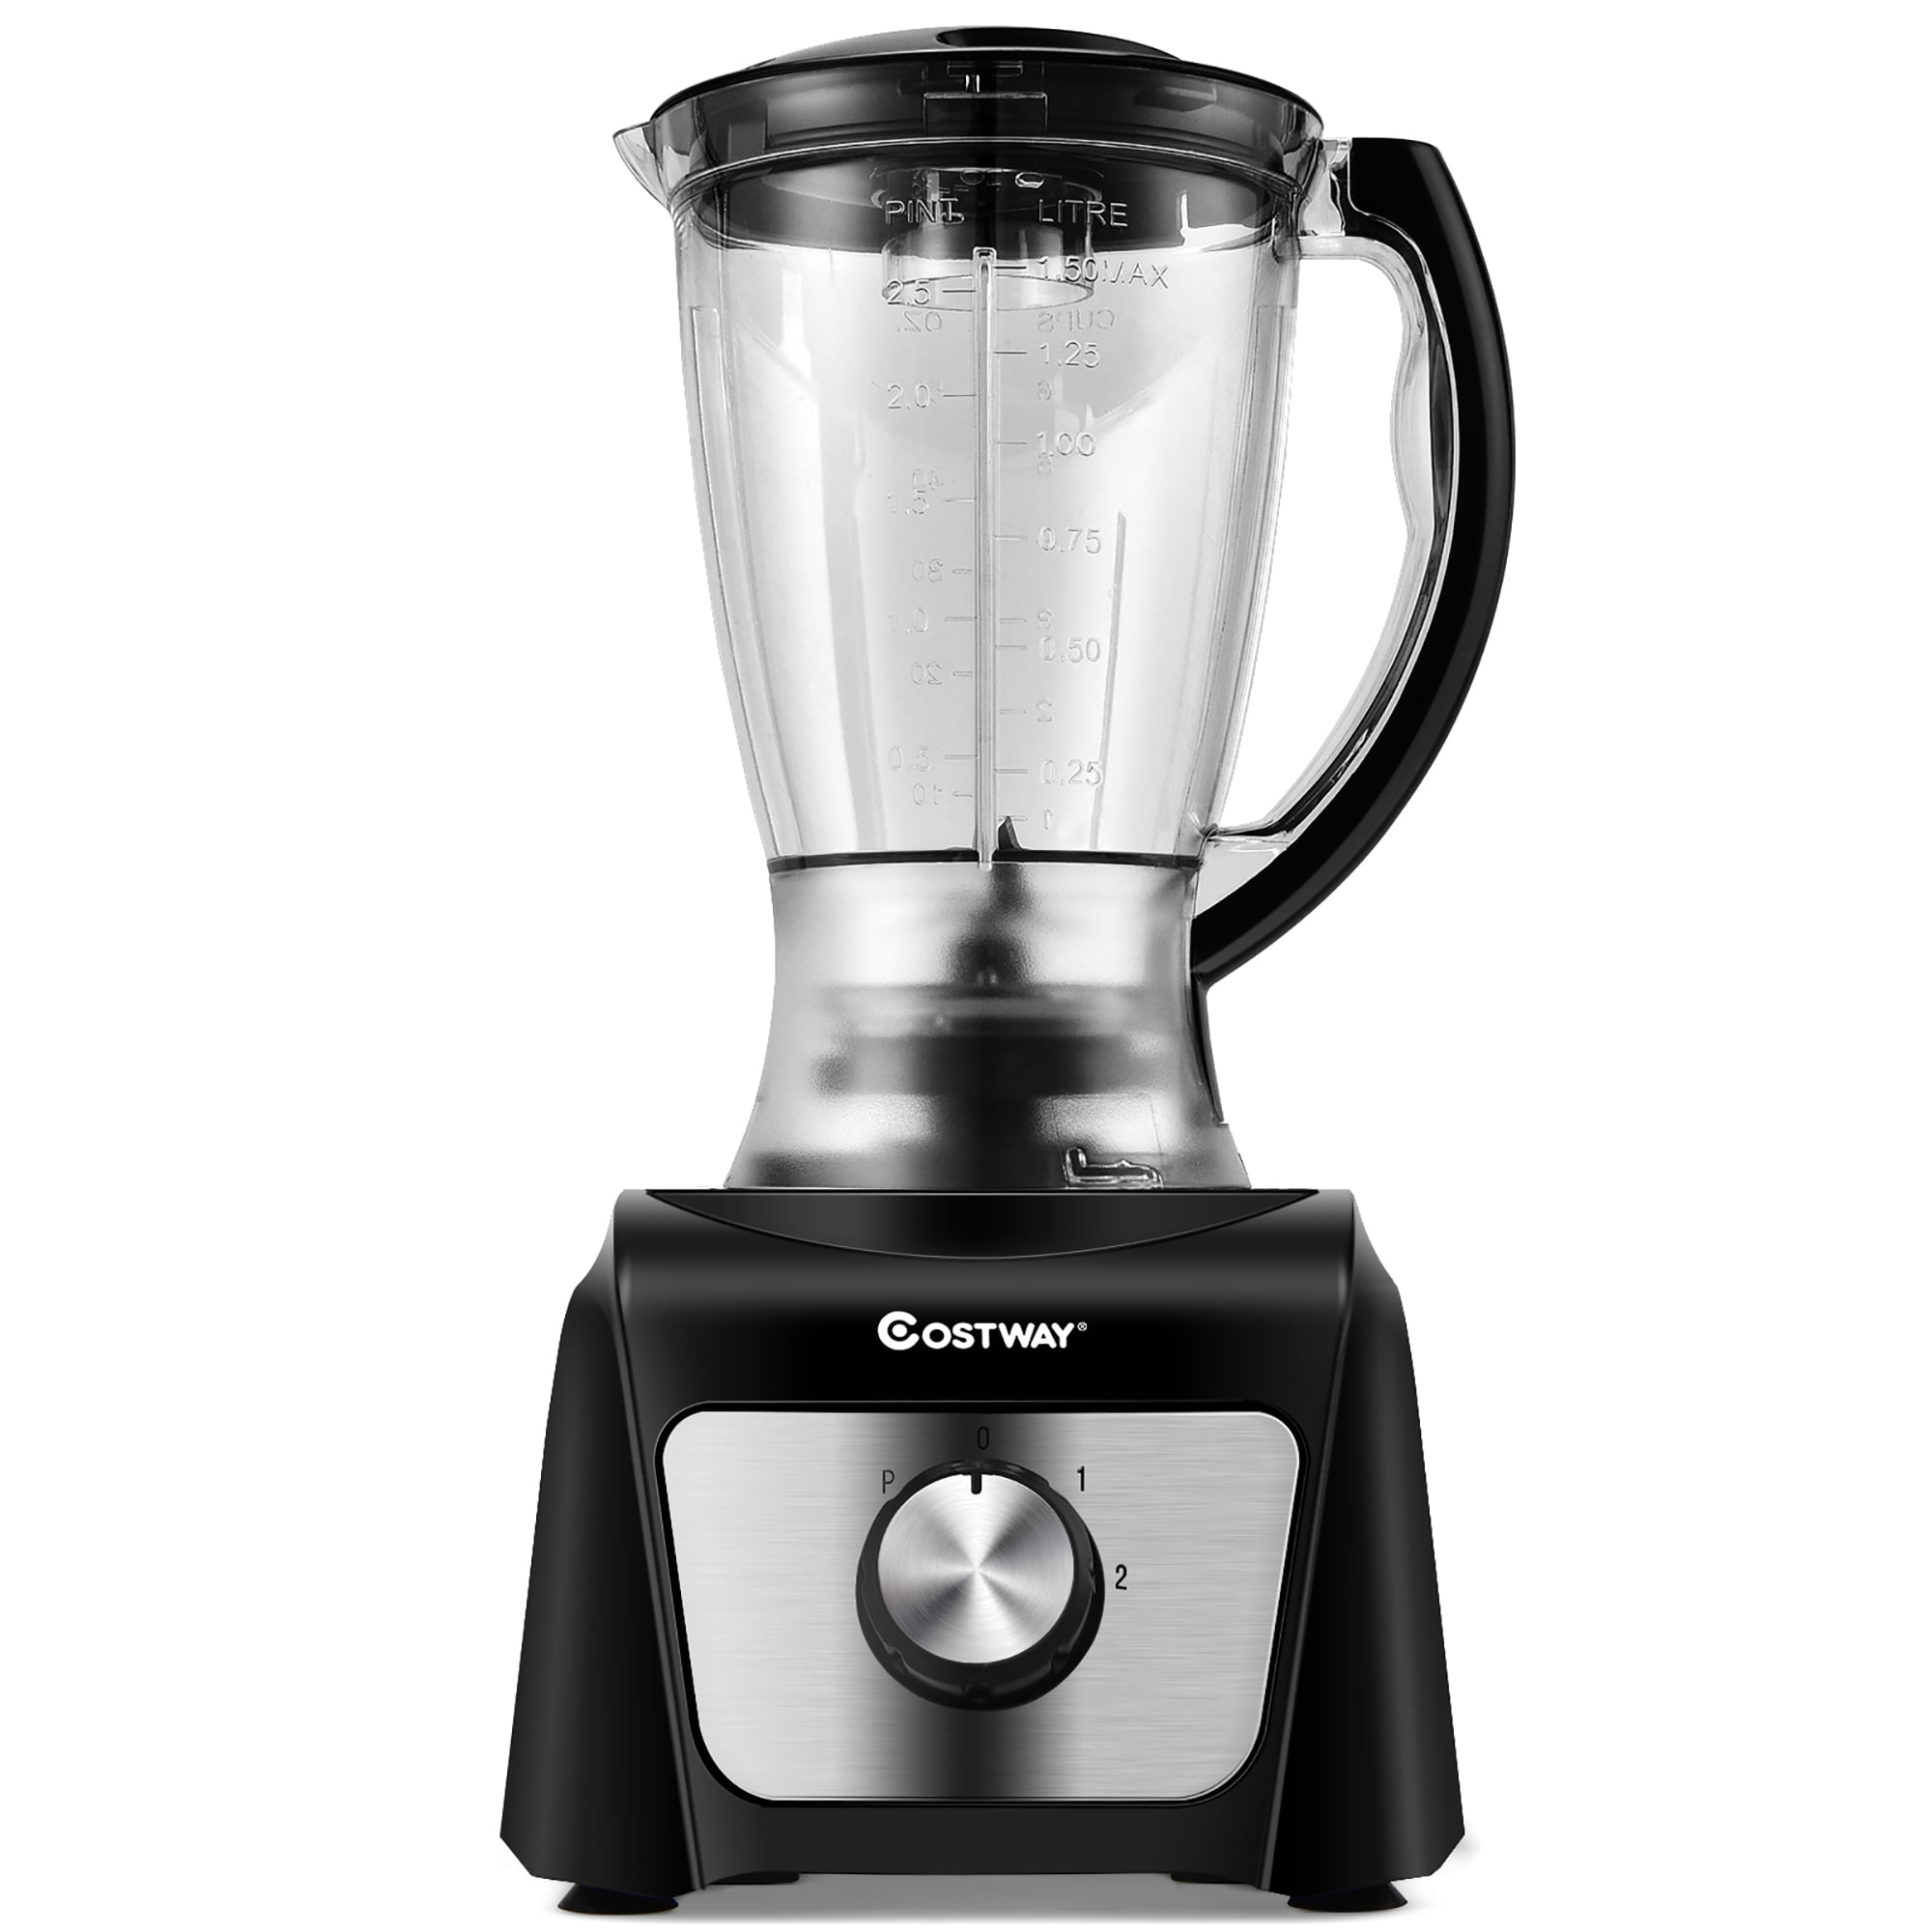 Up To 50% Off on Costway 8 Cup Food Processor